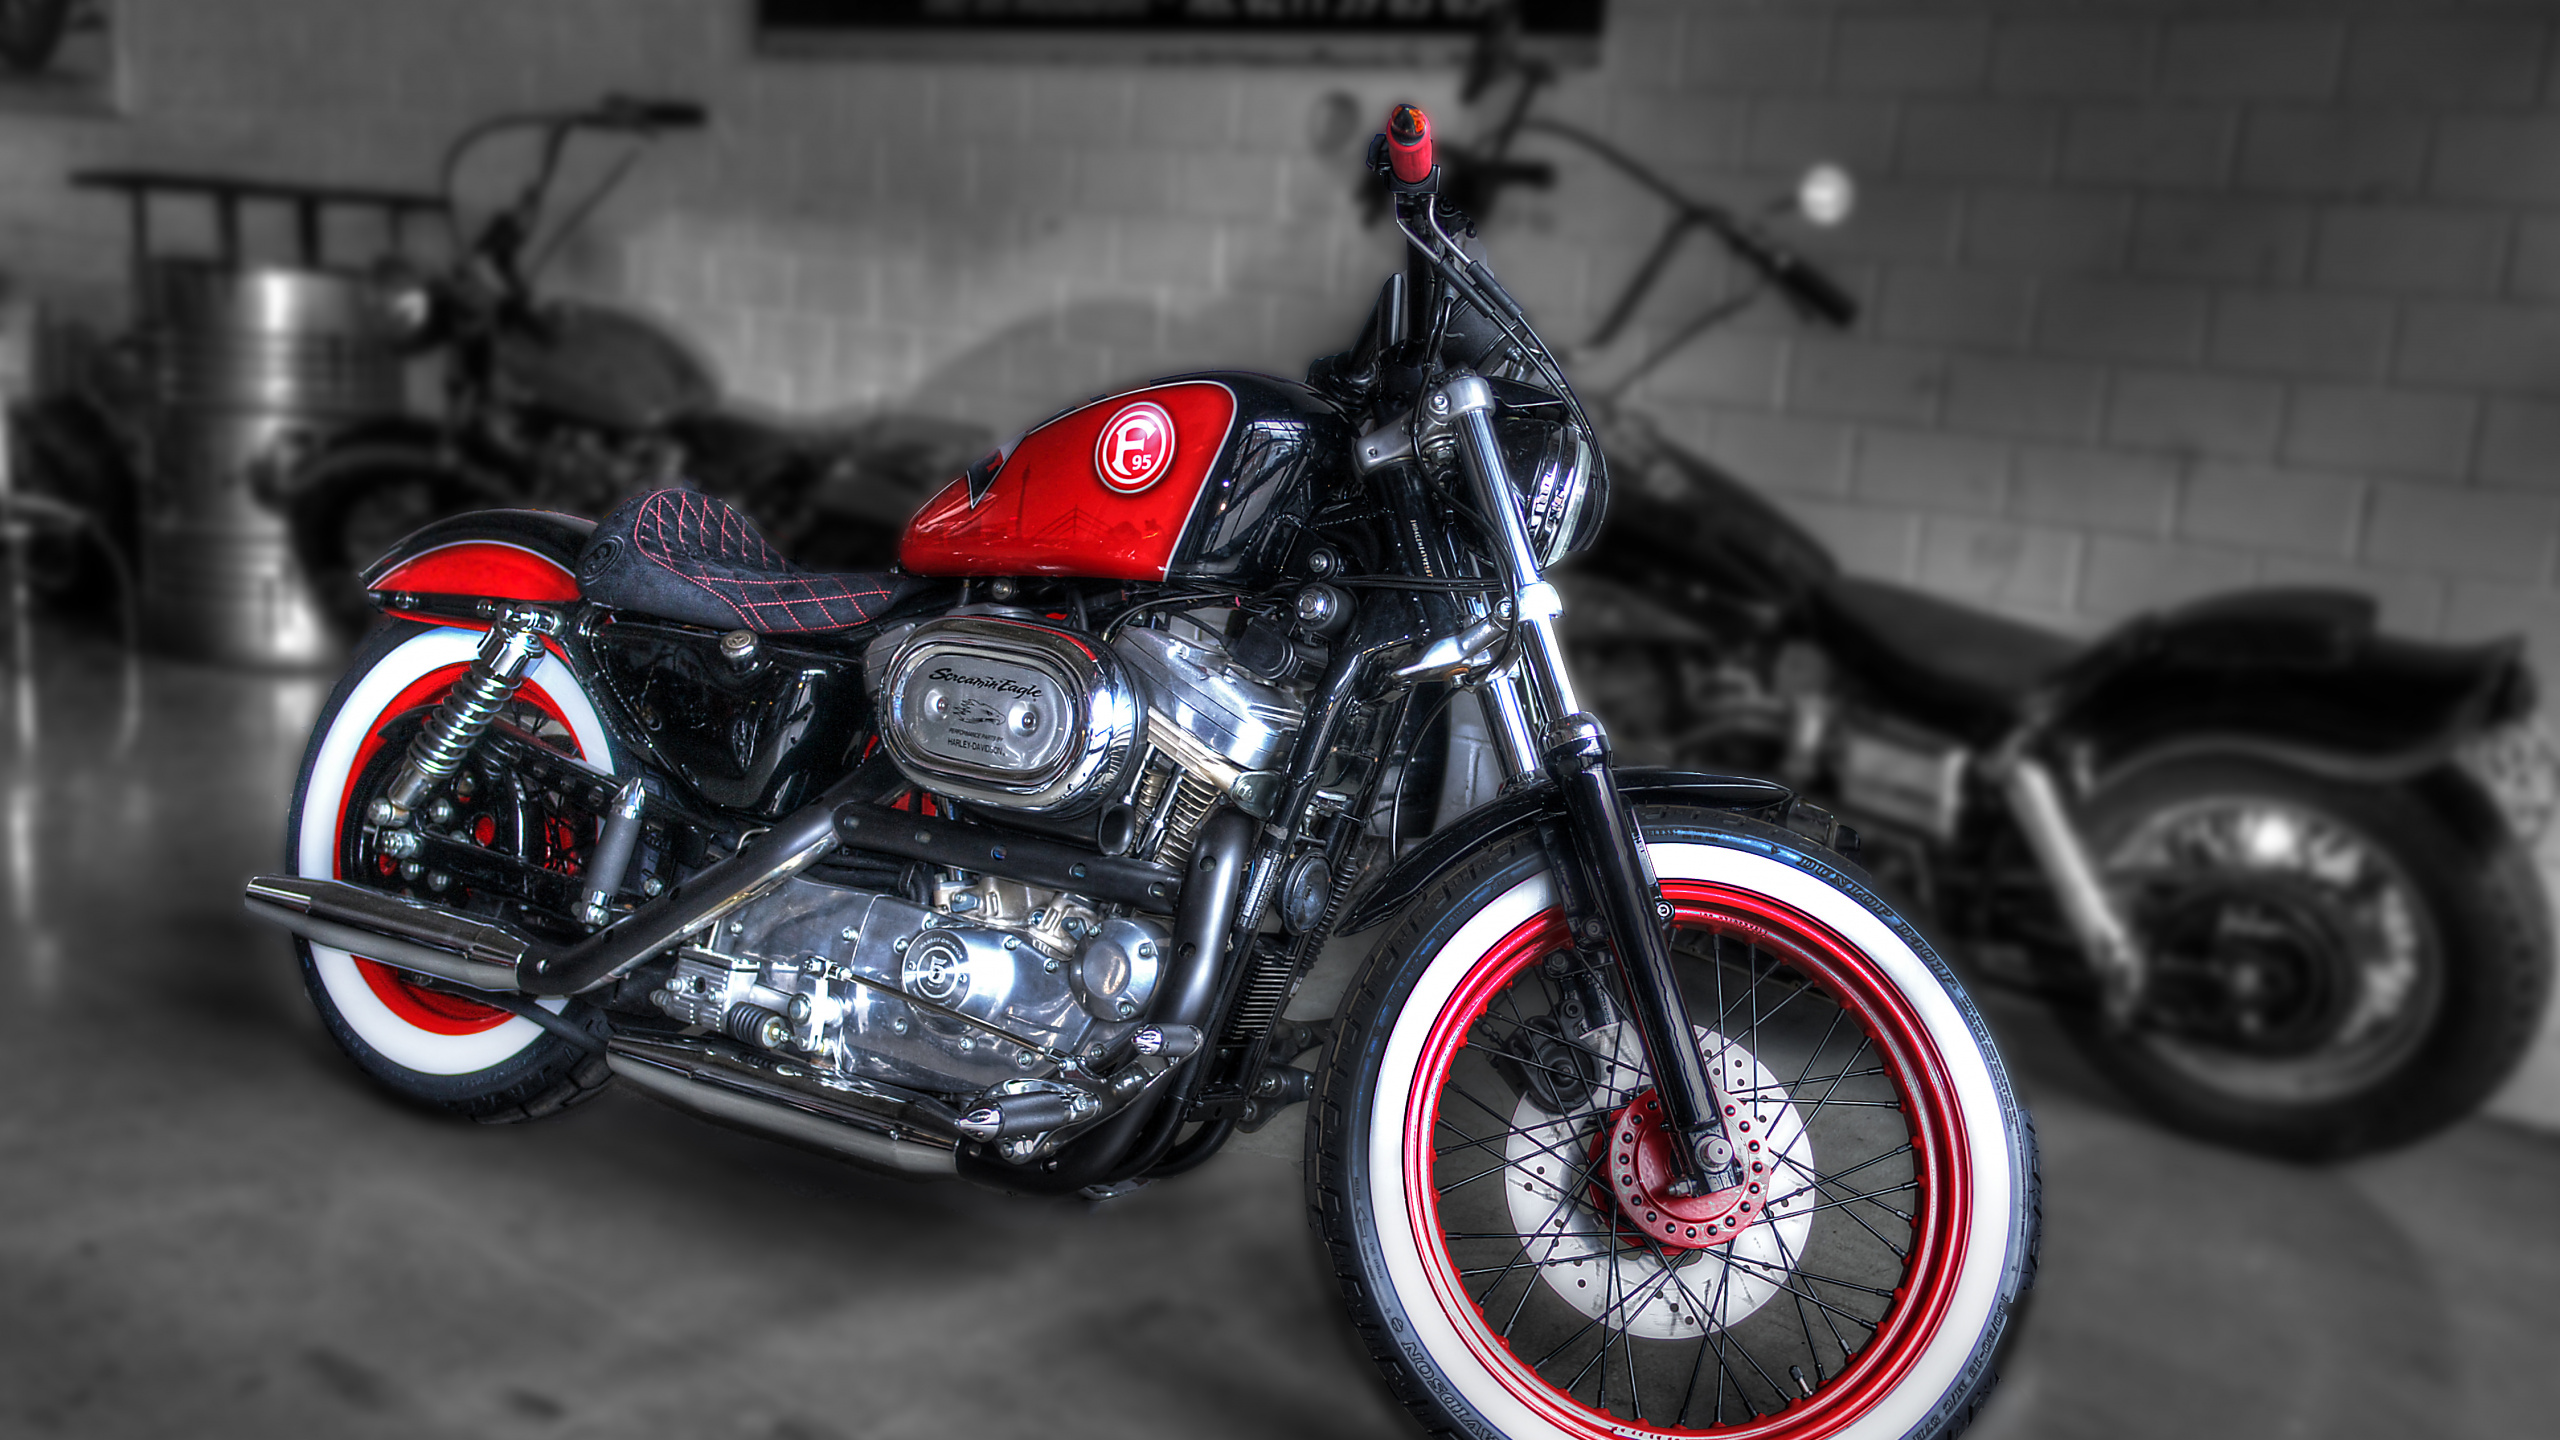 Red and Black Cruiser Motorcycle. Wallpaper in 2560x1440 Resolution